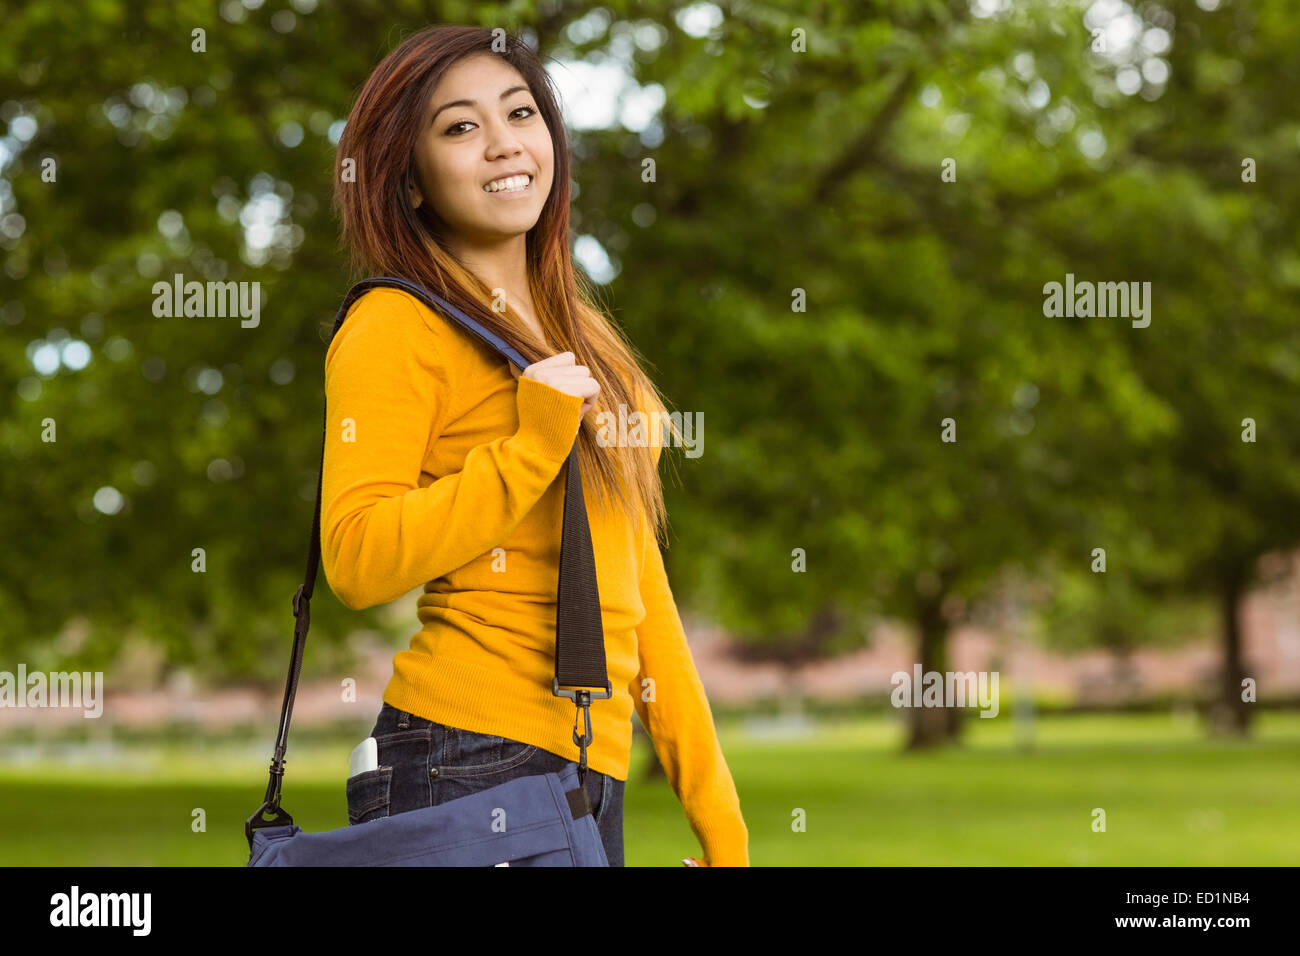 Female college student with bag in park Stock Photo